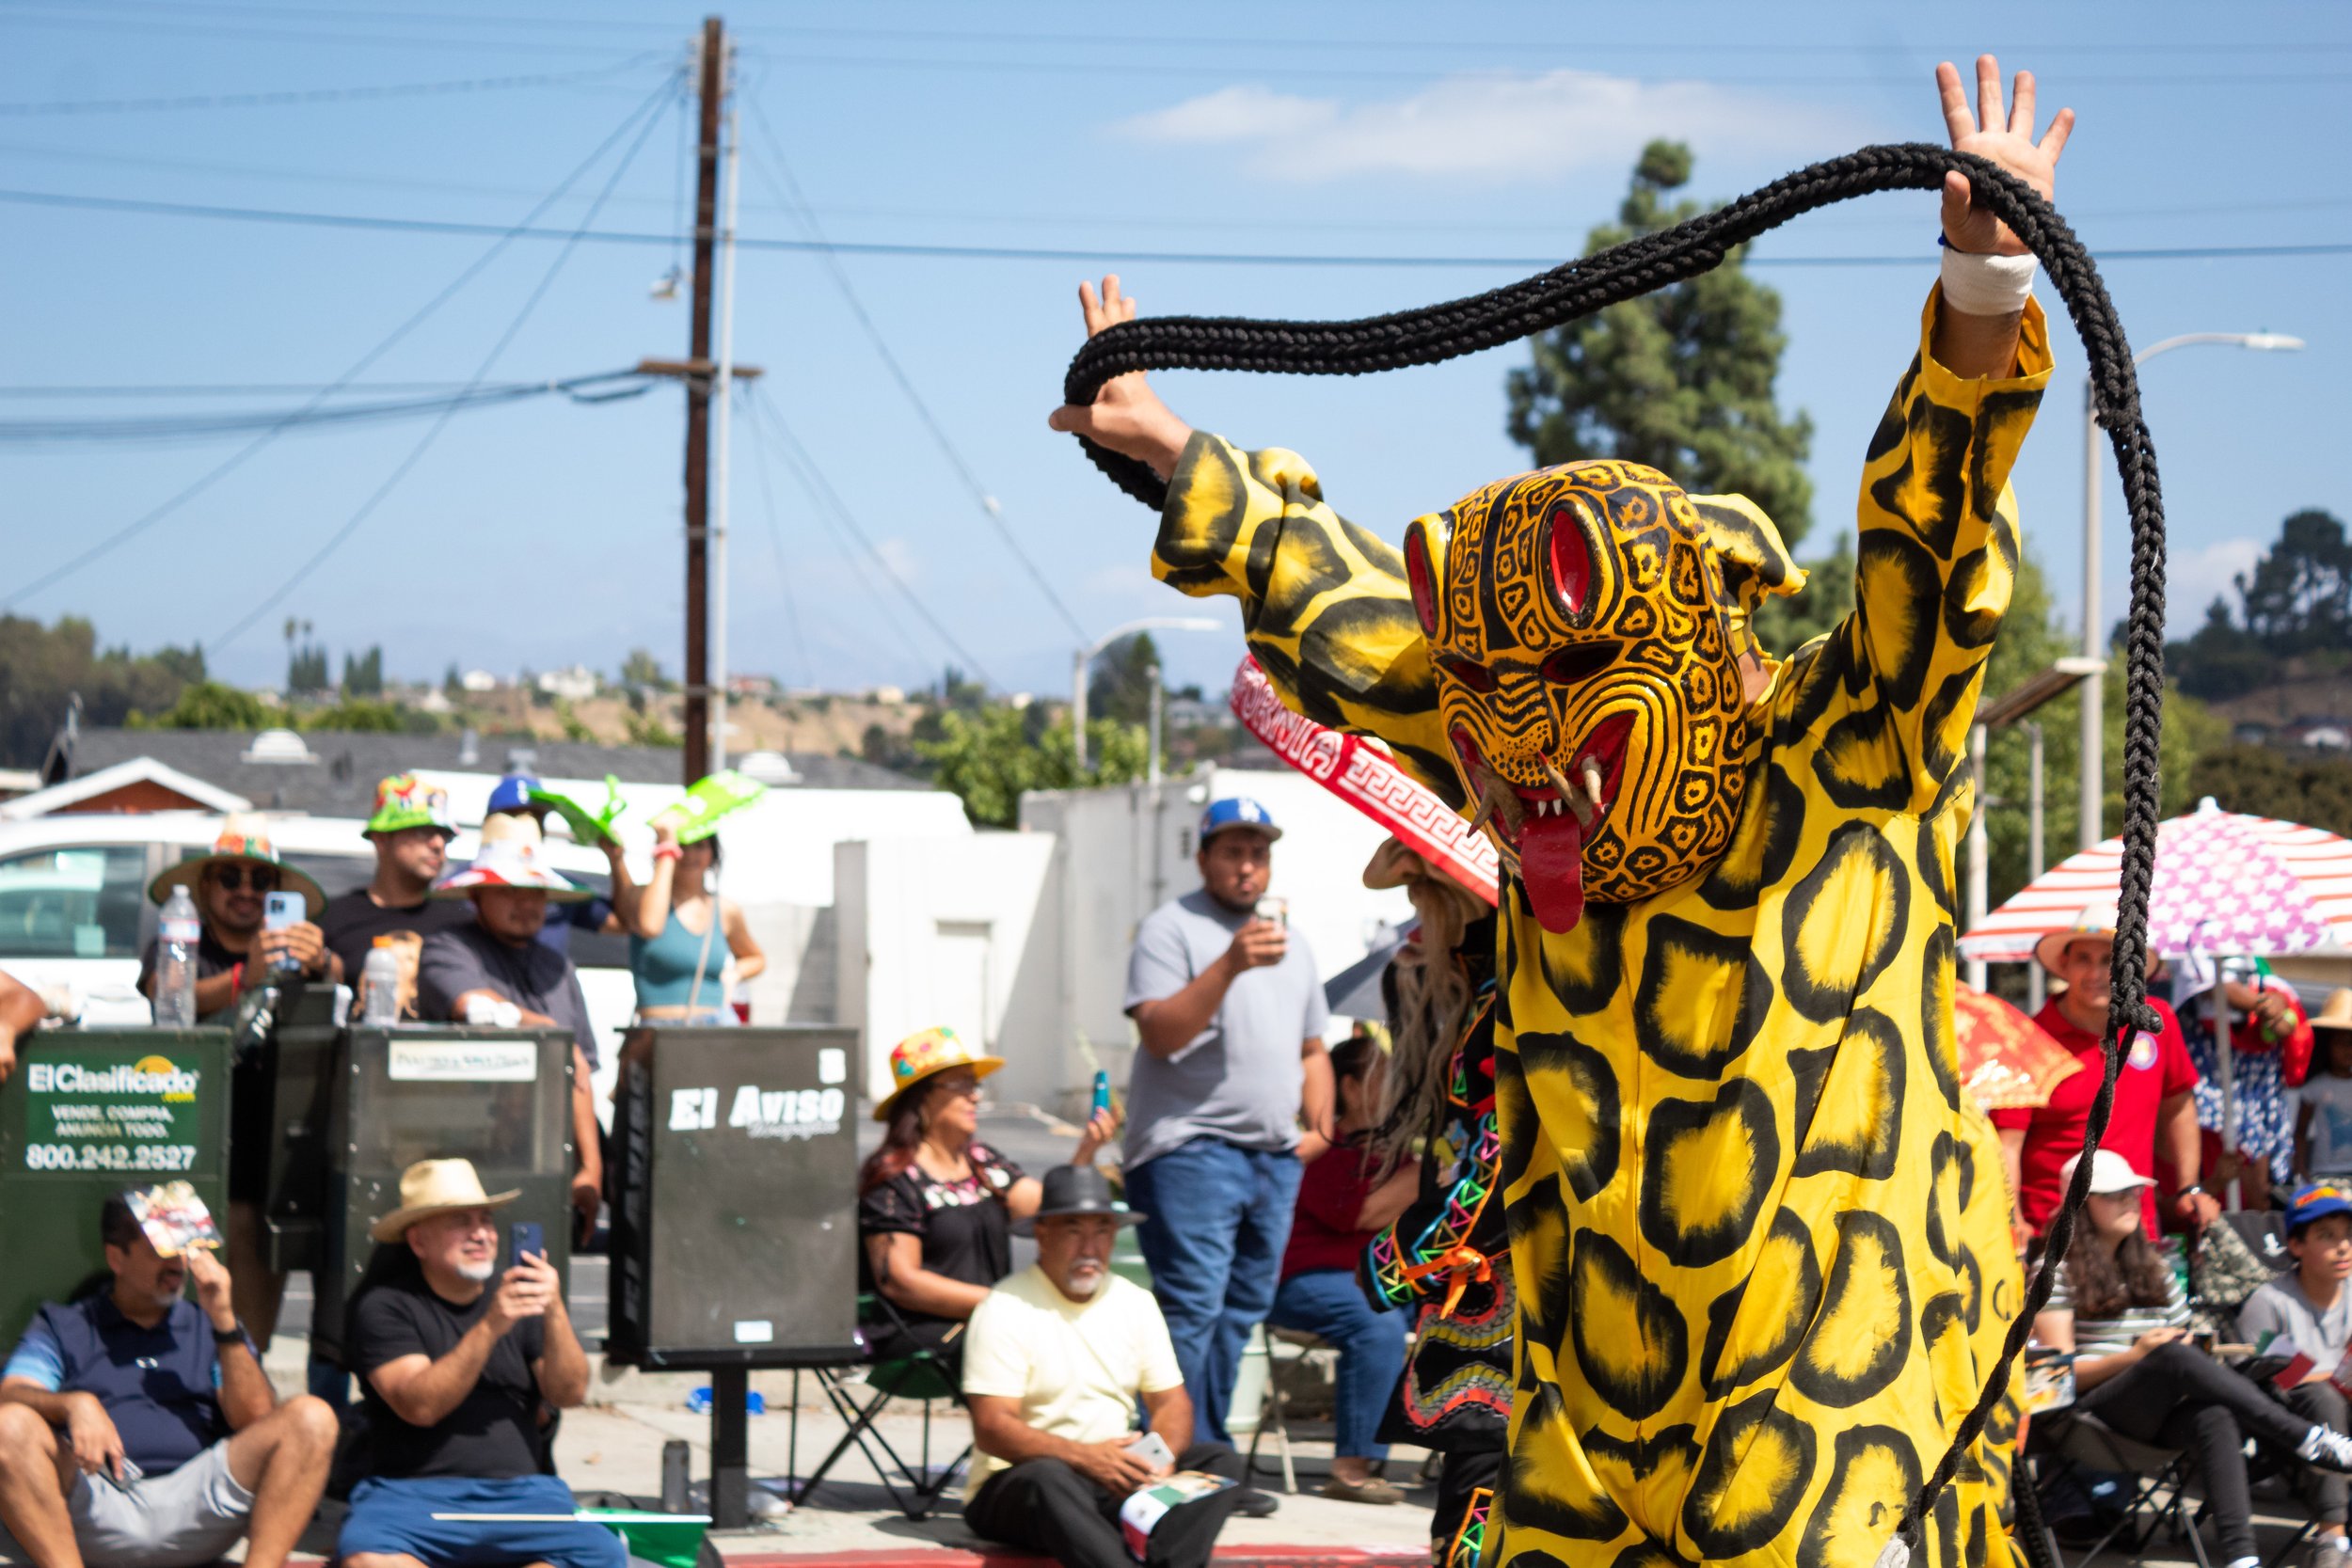  The character Tecuán (translates to monster from spanish), from a performance of Danza de los Tecuanes (The Dance of Jaguars), during the Mexican Independence Day Parade & Festival. The dance is a display of two tribes, Moranchi and Lucas, coming to